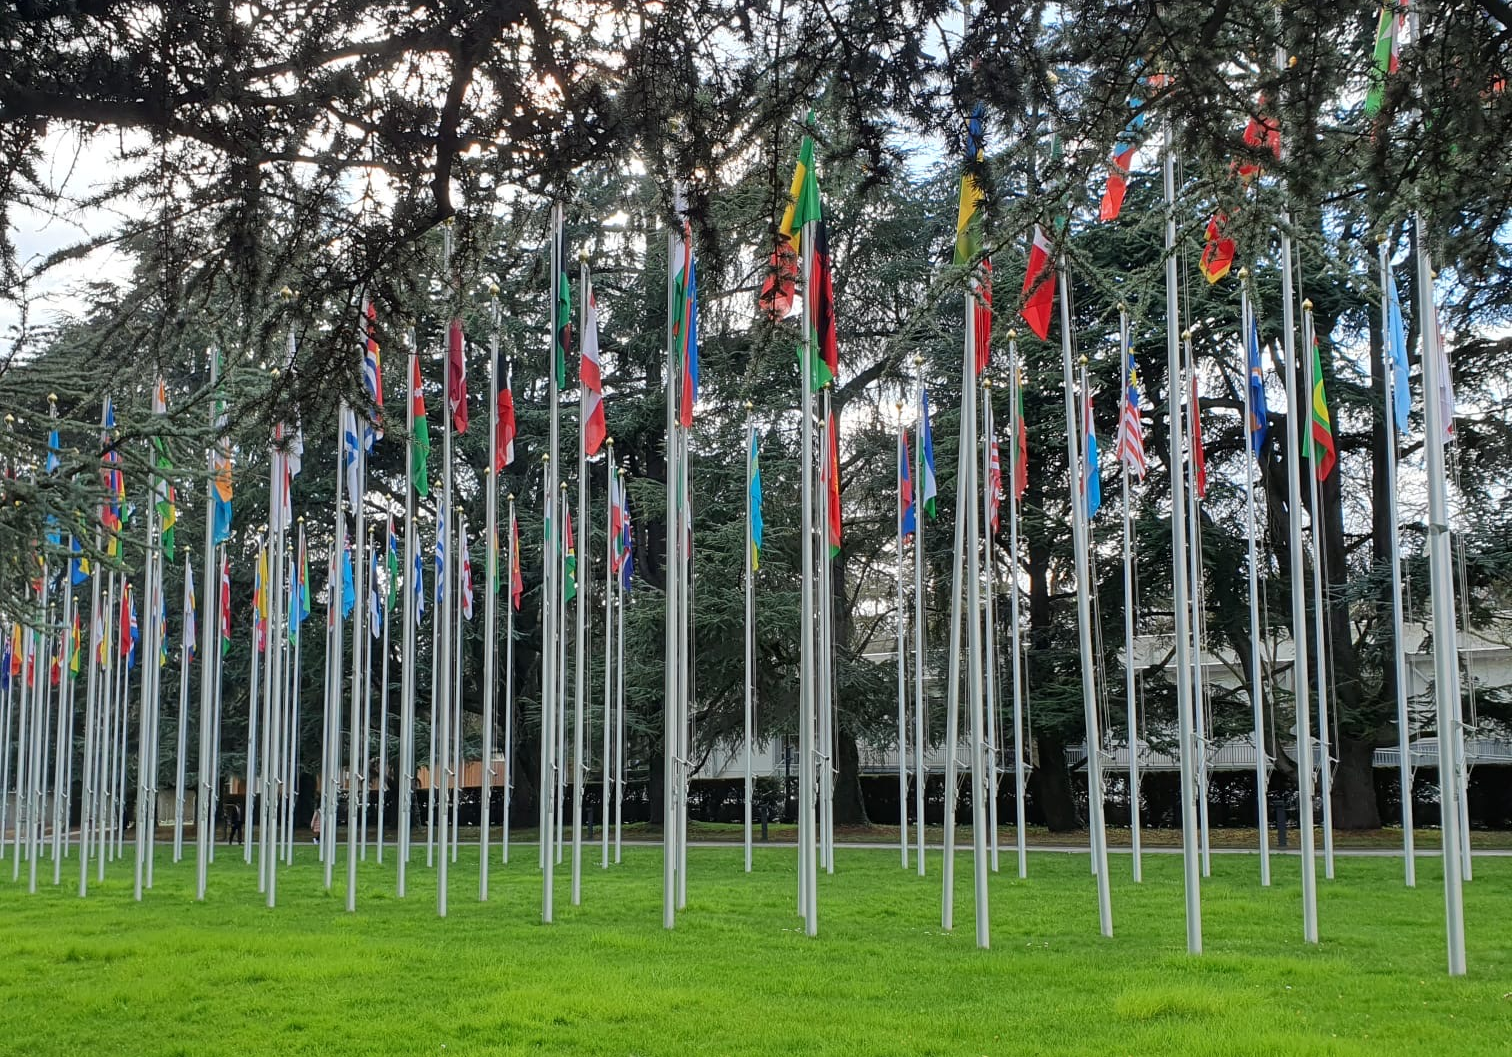 United Nations flags on flagpoles pitched in grass with trees in the background.